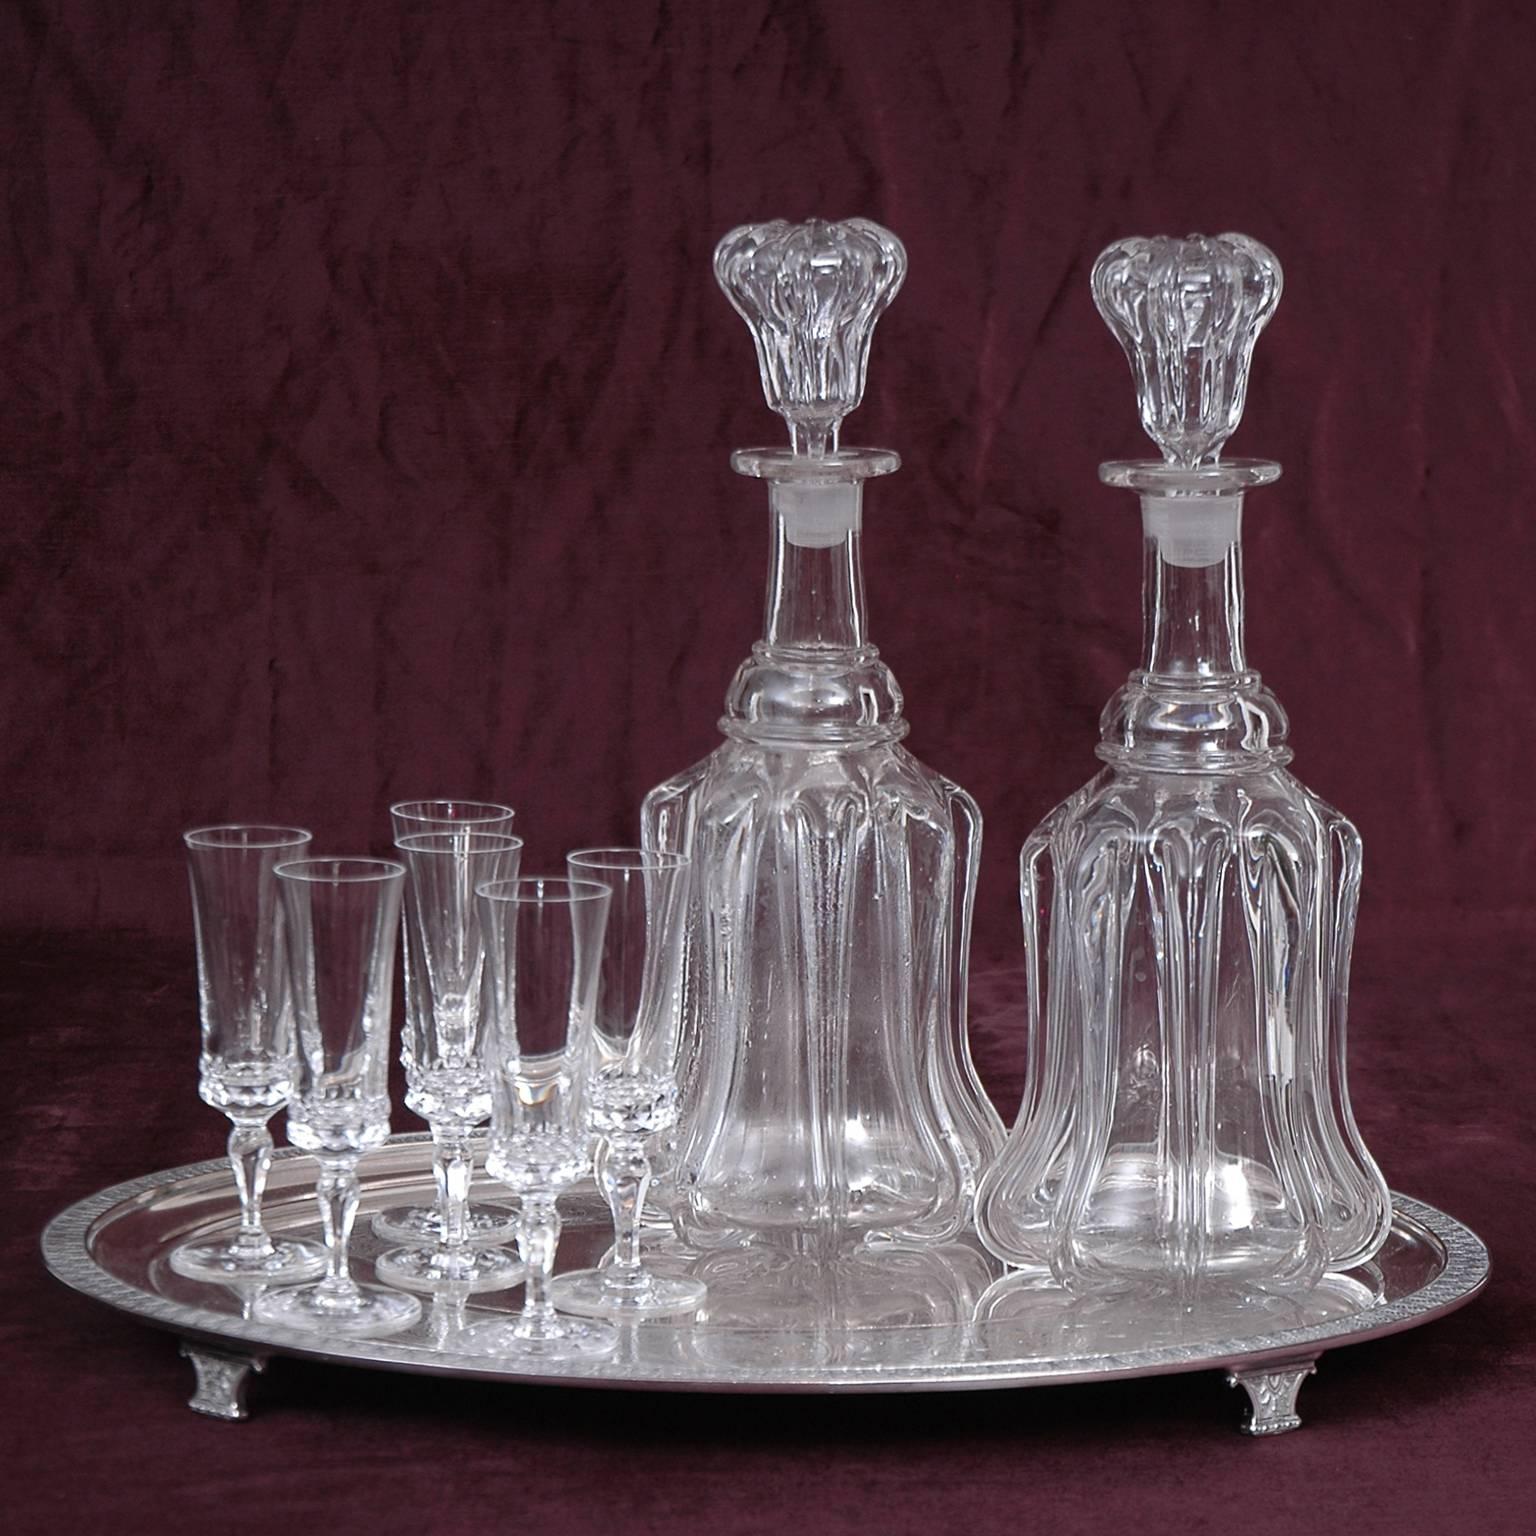 Molded Pair of 18th Century English Port and Sherry Decanters